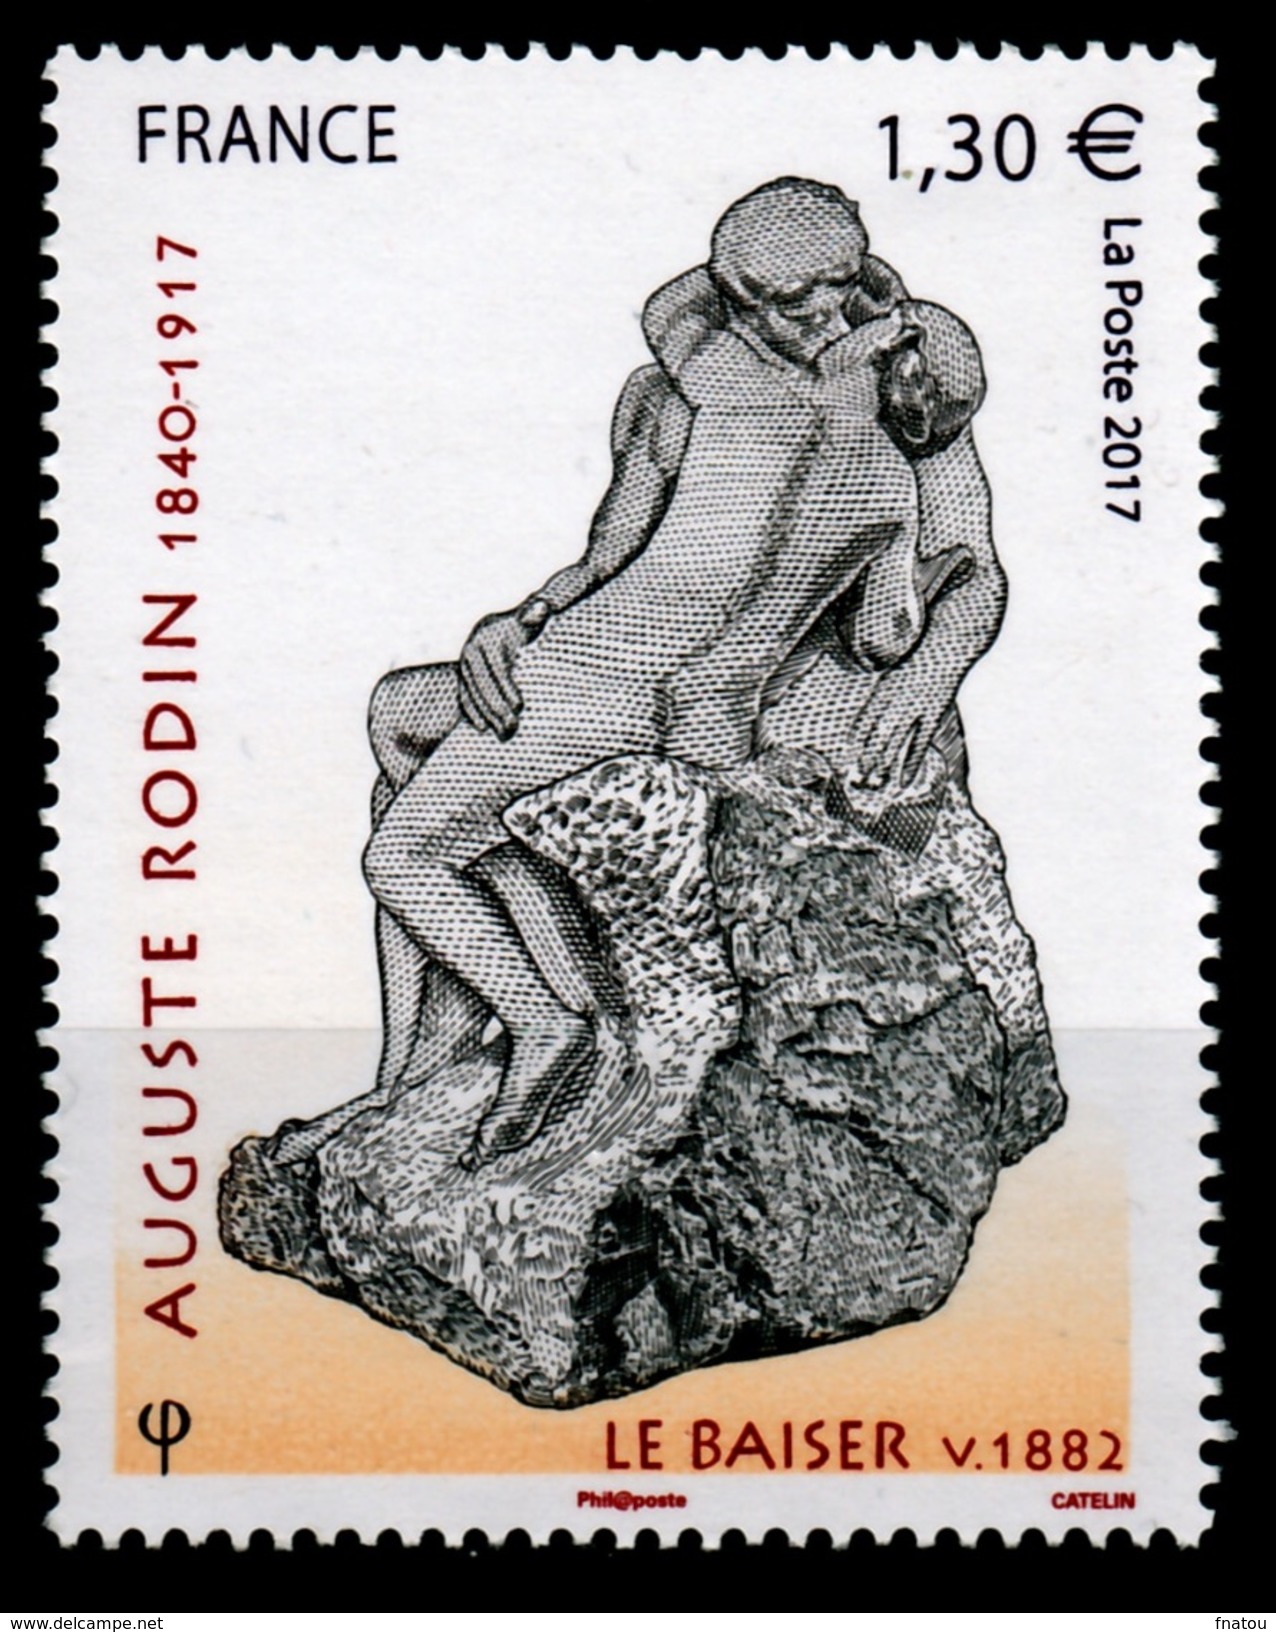 France, The Kiss, Famous Rodin Sculpture, 2017, MNH VF - Unused Stamps